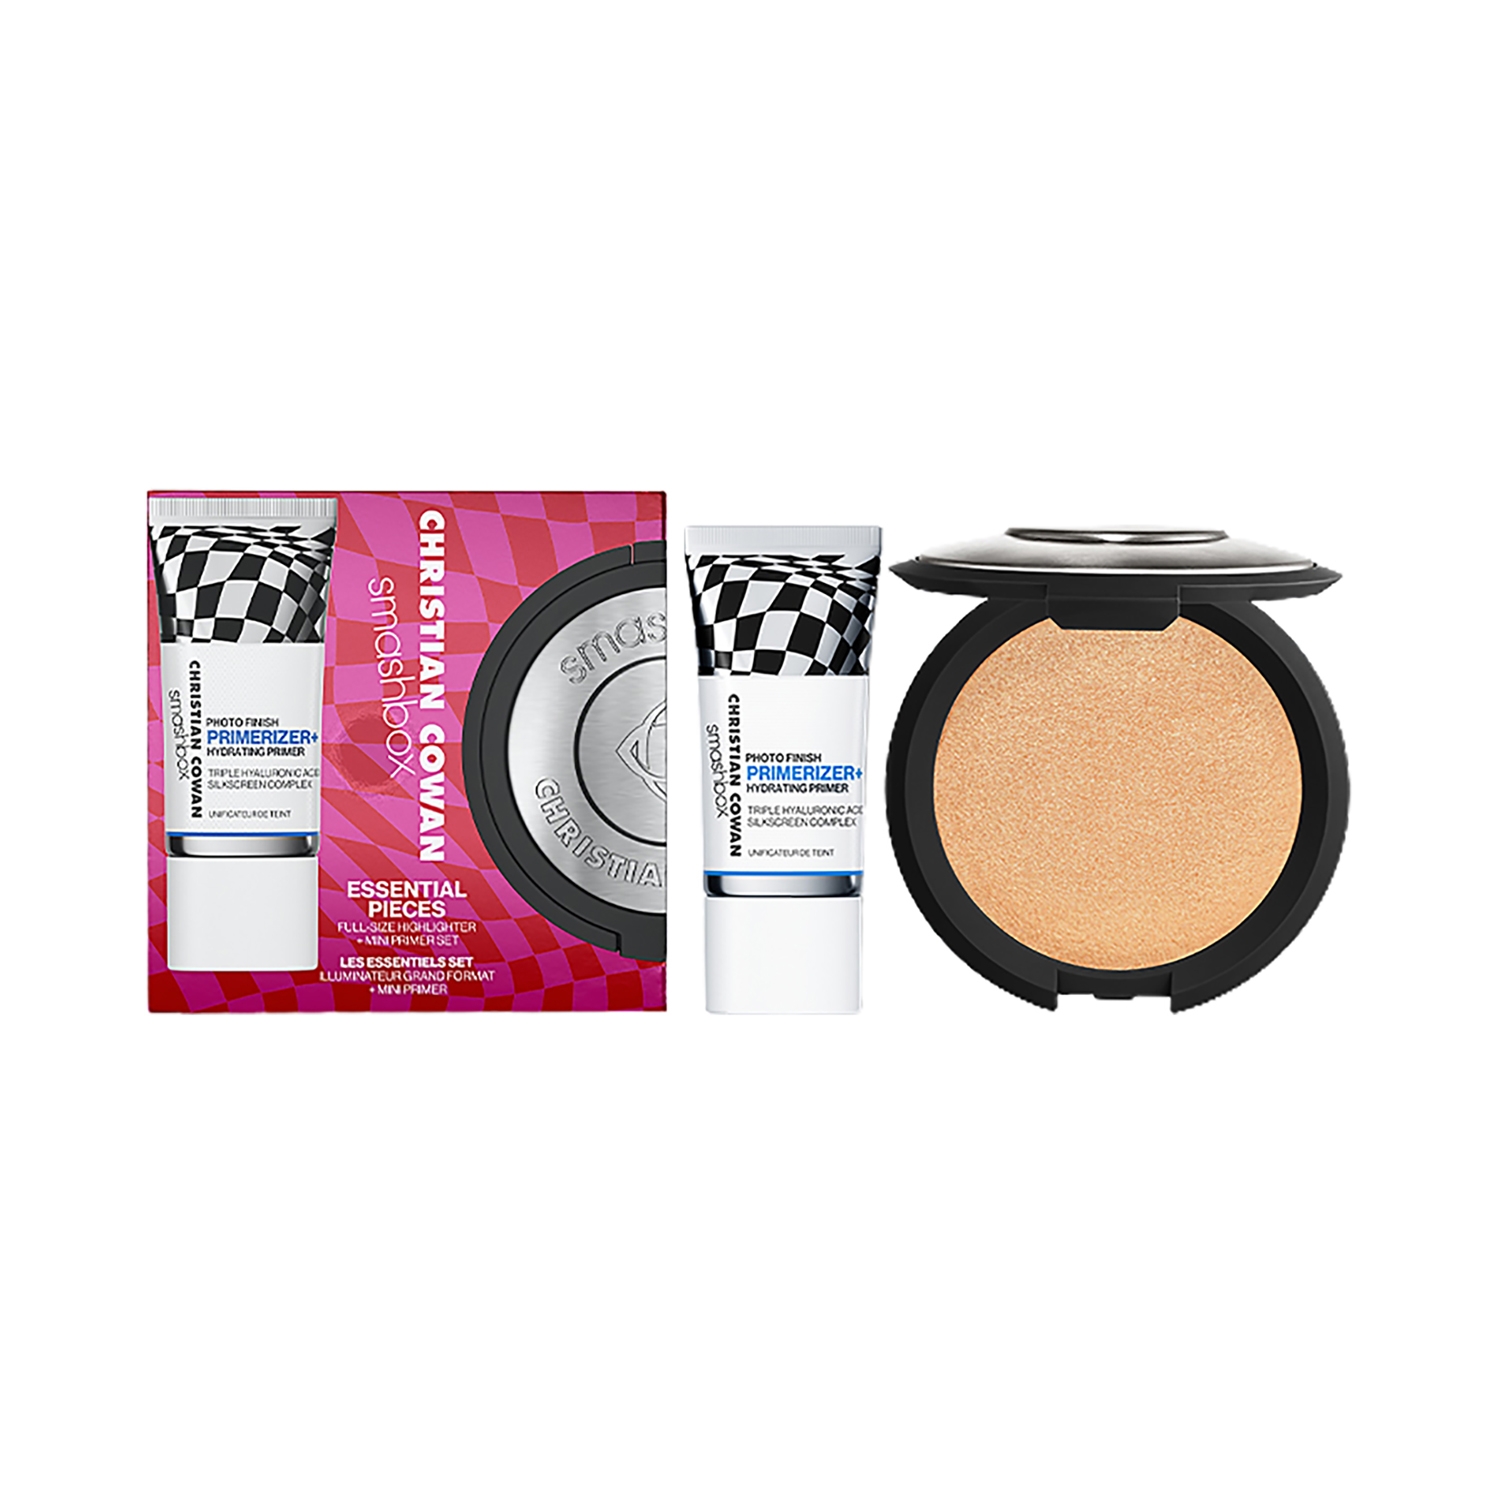 Smashbox | Smashbox Essential Pieces Full-Size Highlighter + Mini Primer Set - Beige and Clear (2Pcs)